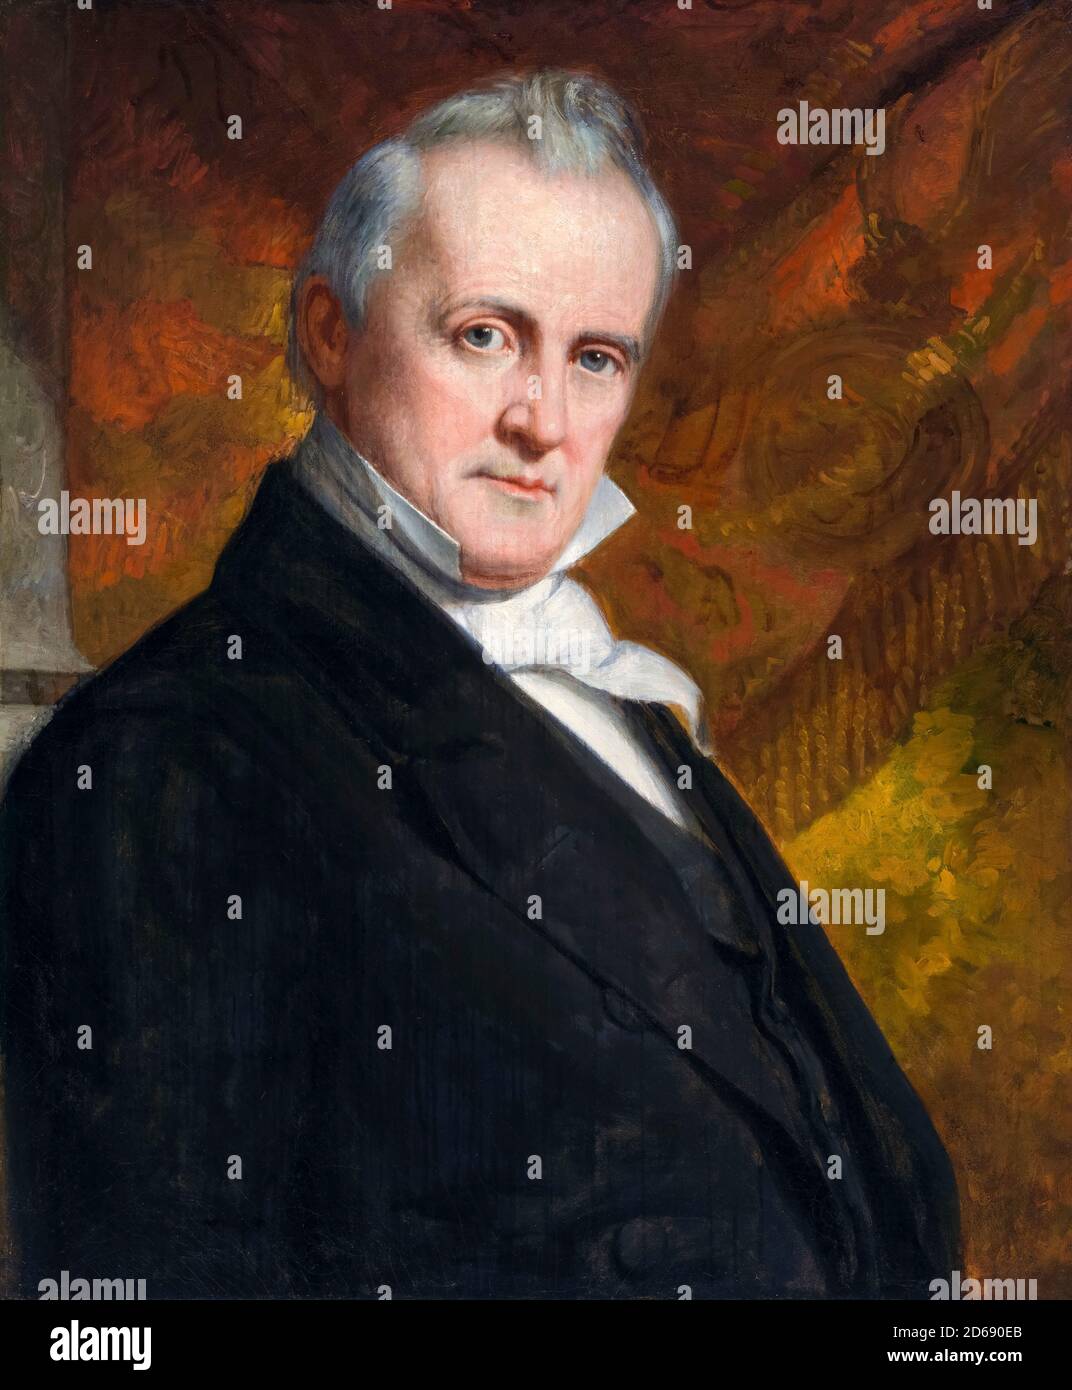 James Buchanan Jr (1791-1868), American politician who served as the 15th President of the United States, portrait painting by George Peter Alexander Healy, 1859 Stock Photo